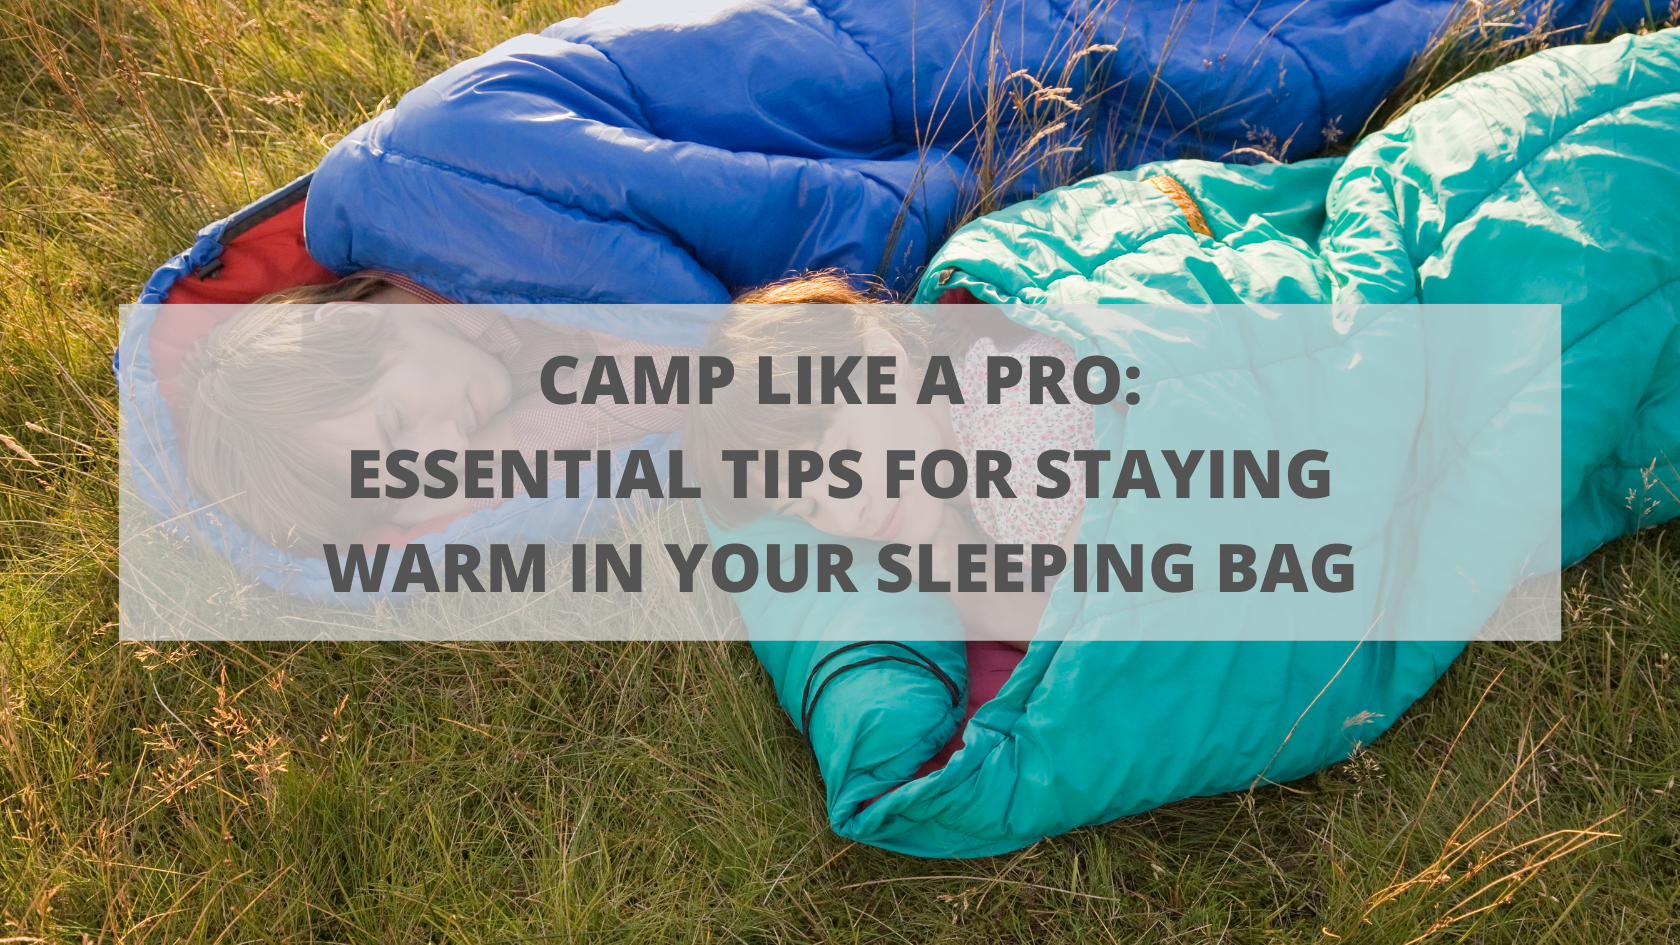 Camp Like a Pro: Essential Tips for Staying Warm in Your Sleeping Bag